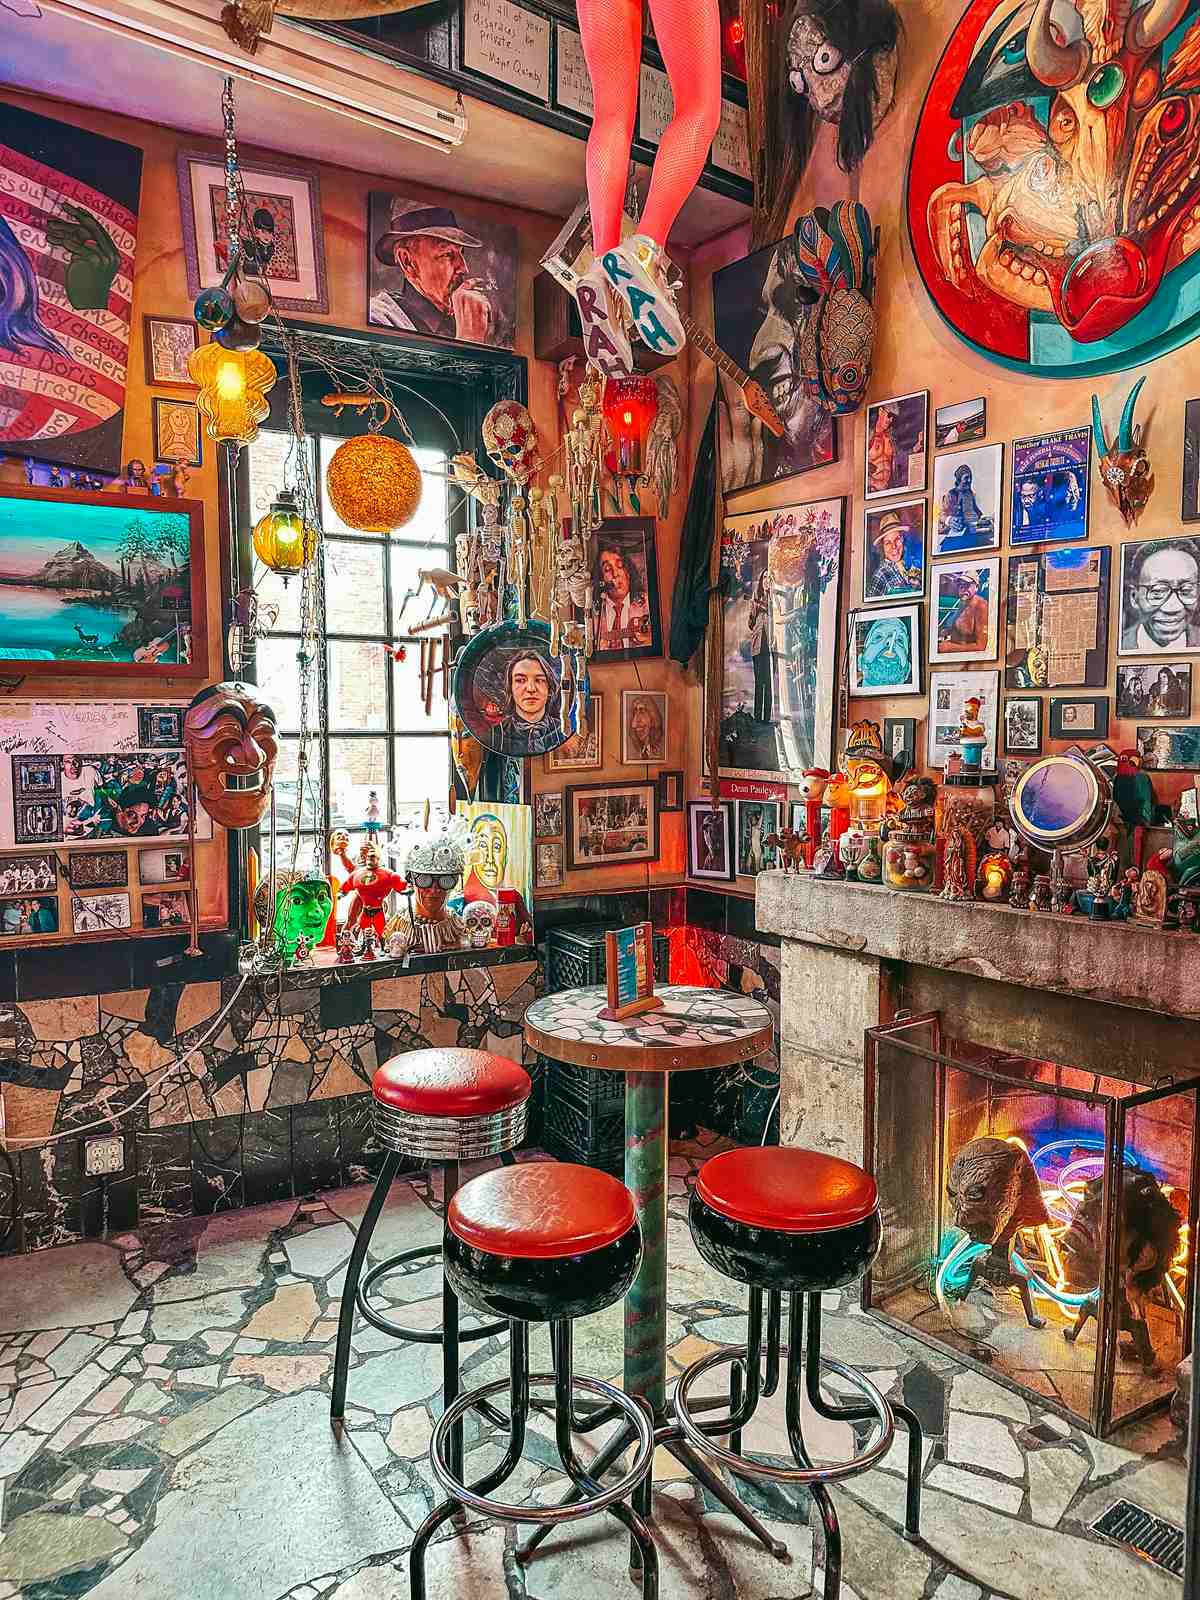 Venice Cafe, a quirky bar in St. Louis